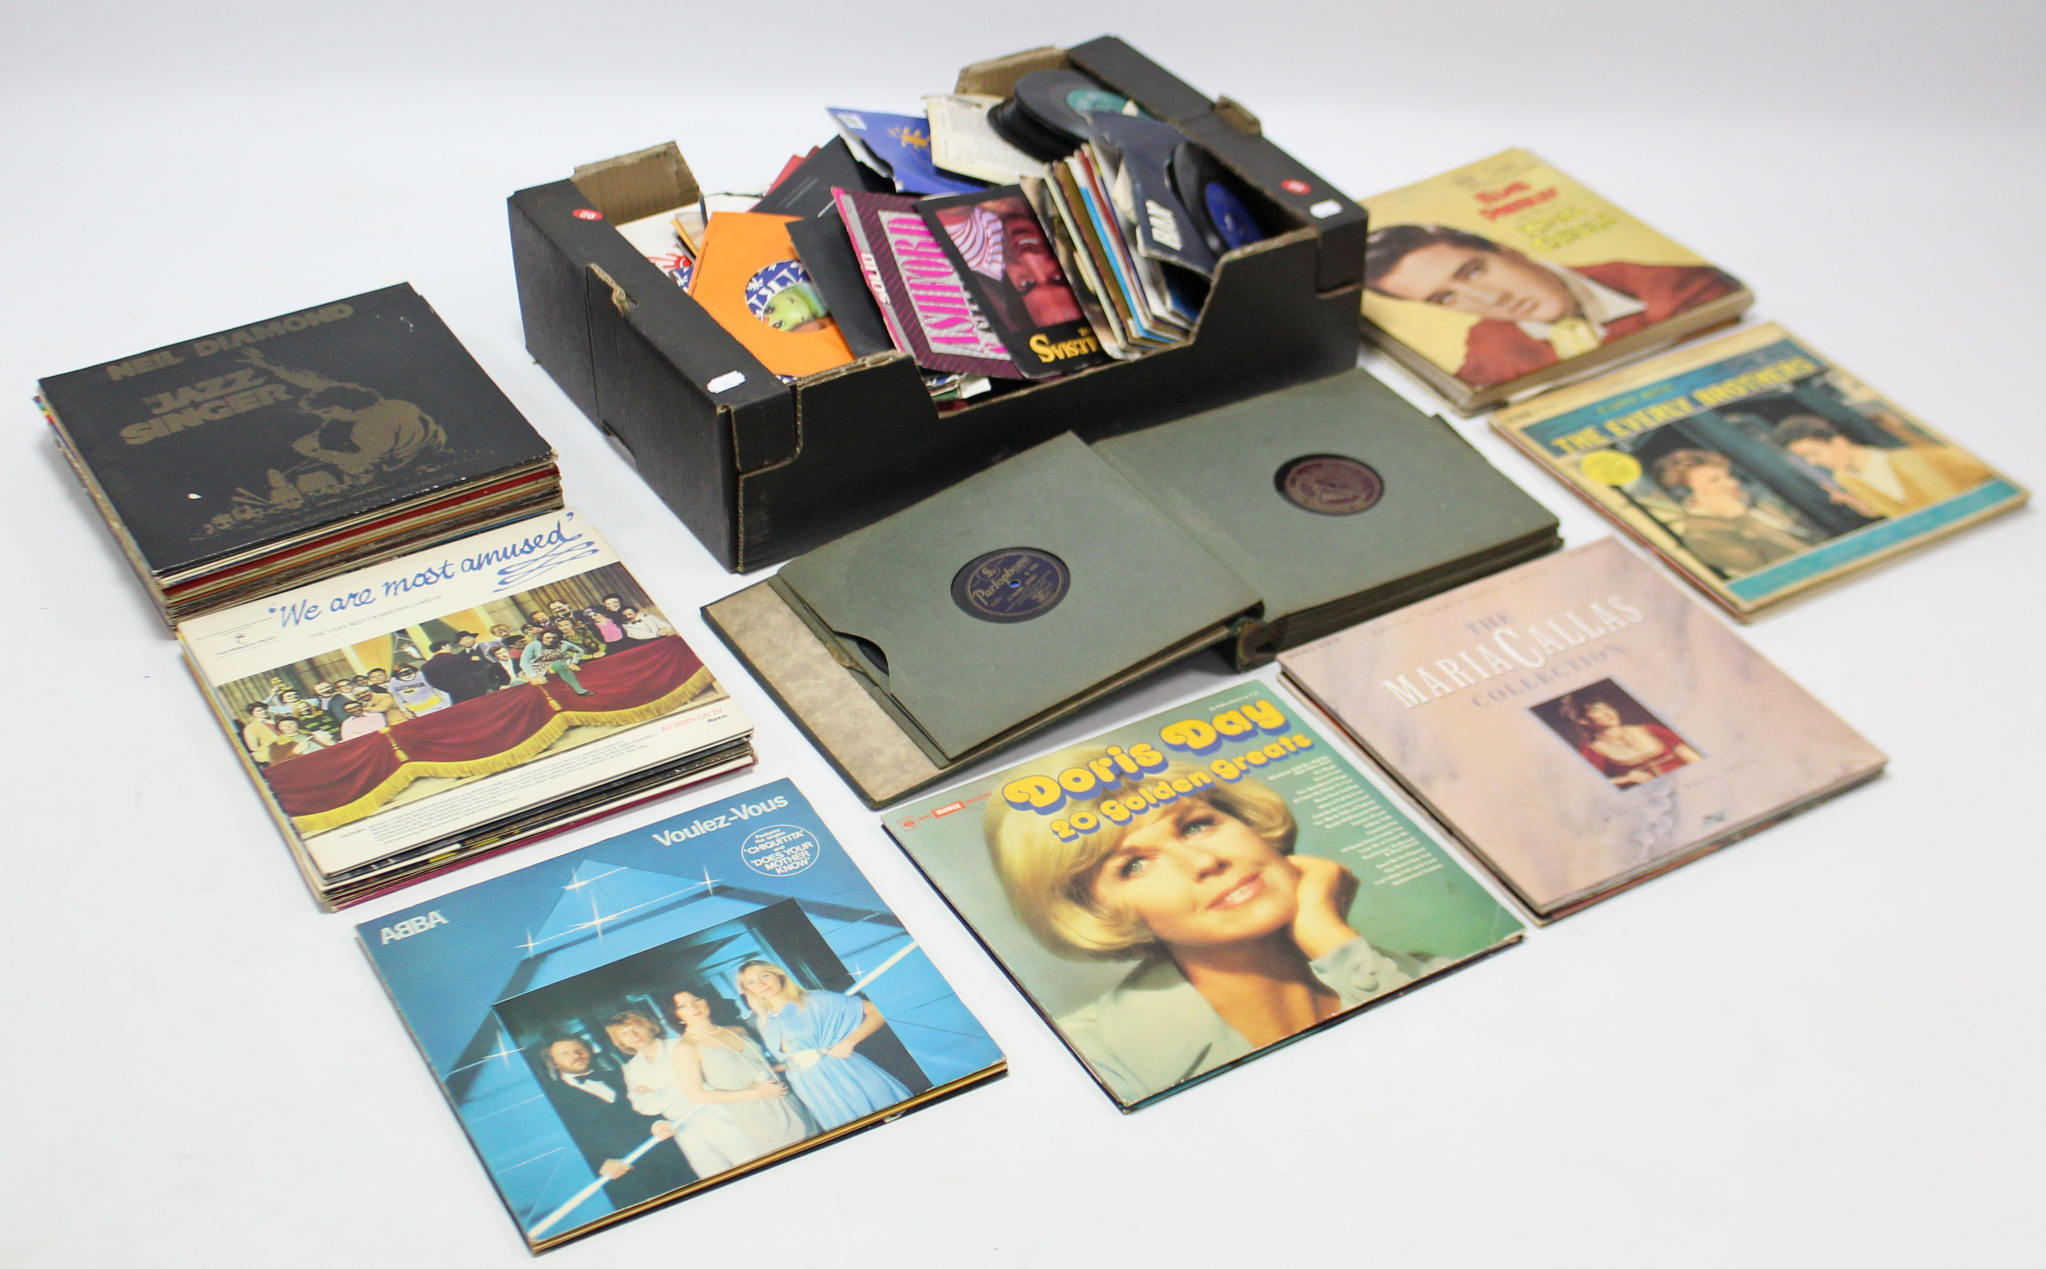 Approximately four hundred various records – pop music, etc.